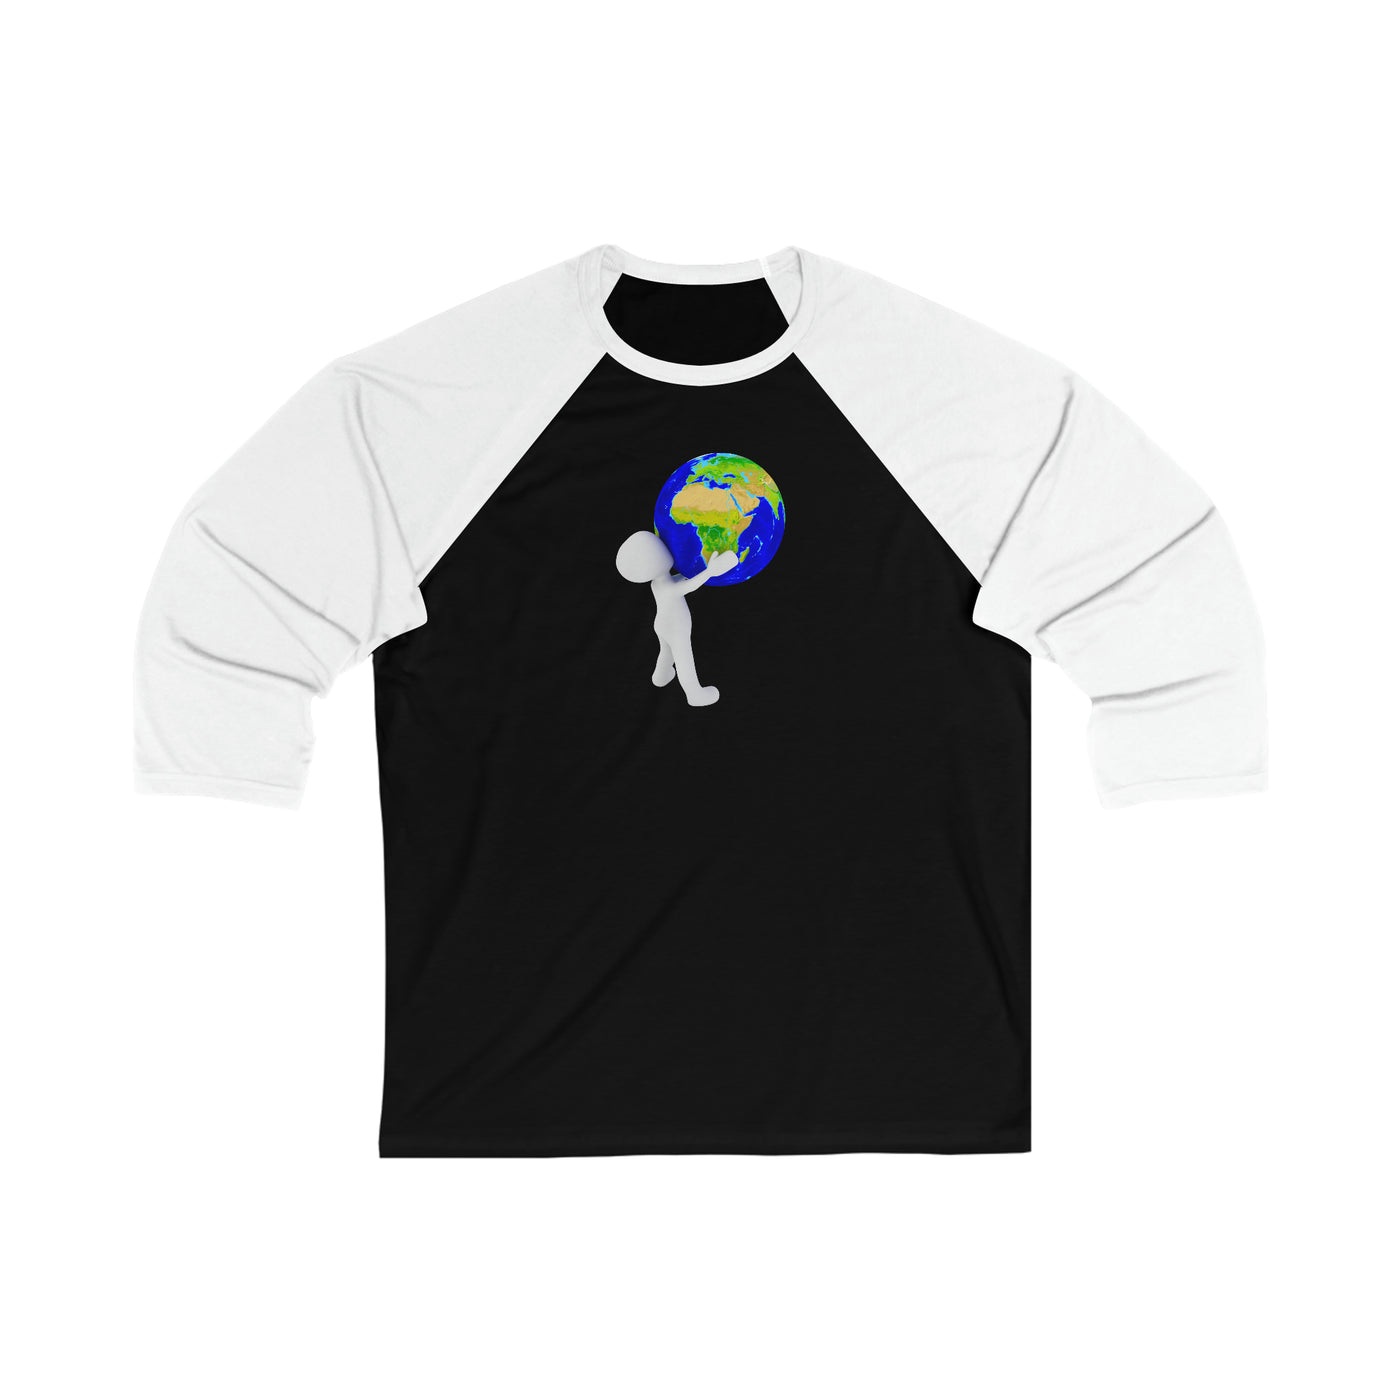 Blessed are the curious they will travel Unisex 3\4 Sleeve Baseball Tee